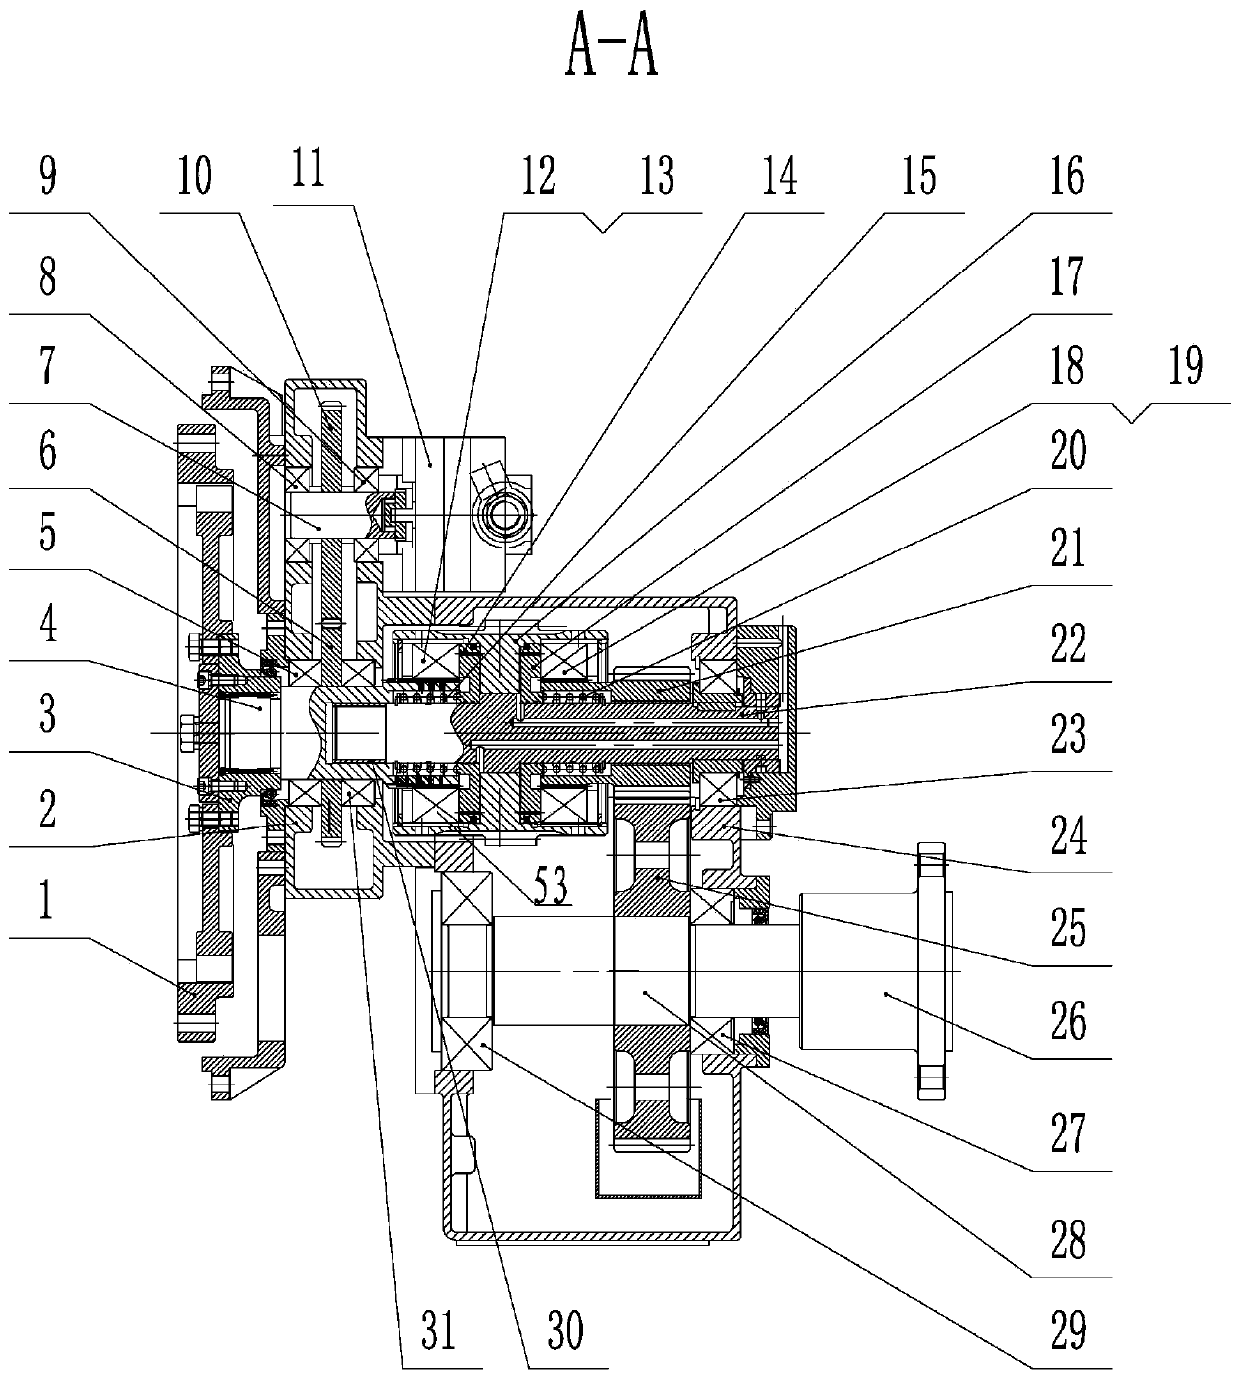 Oil-electric hybrid power input ship gearbox